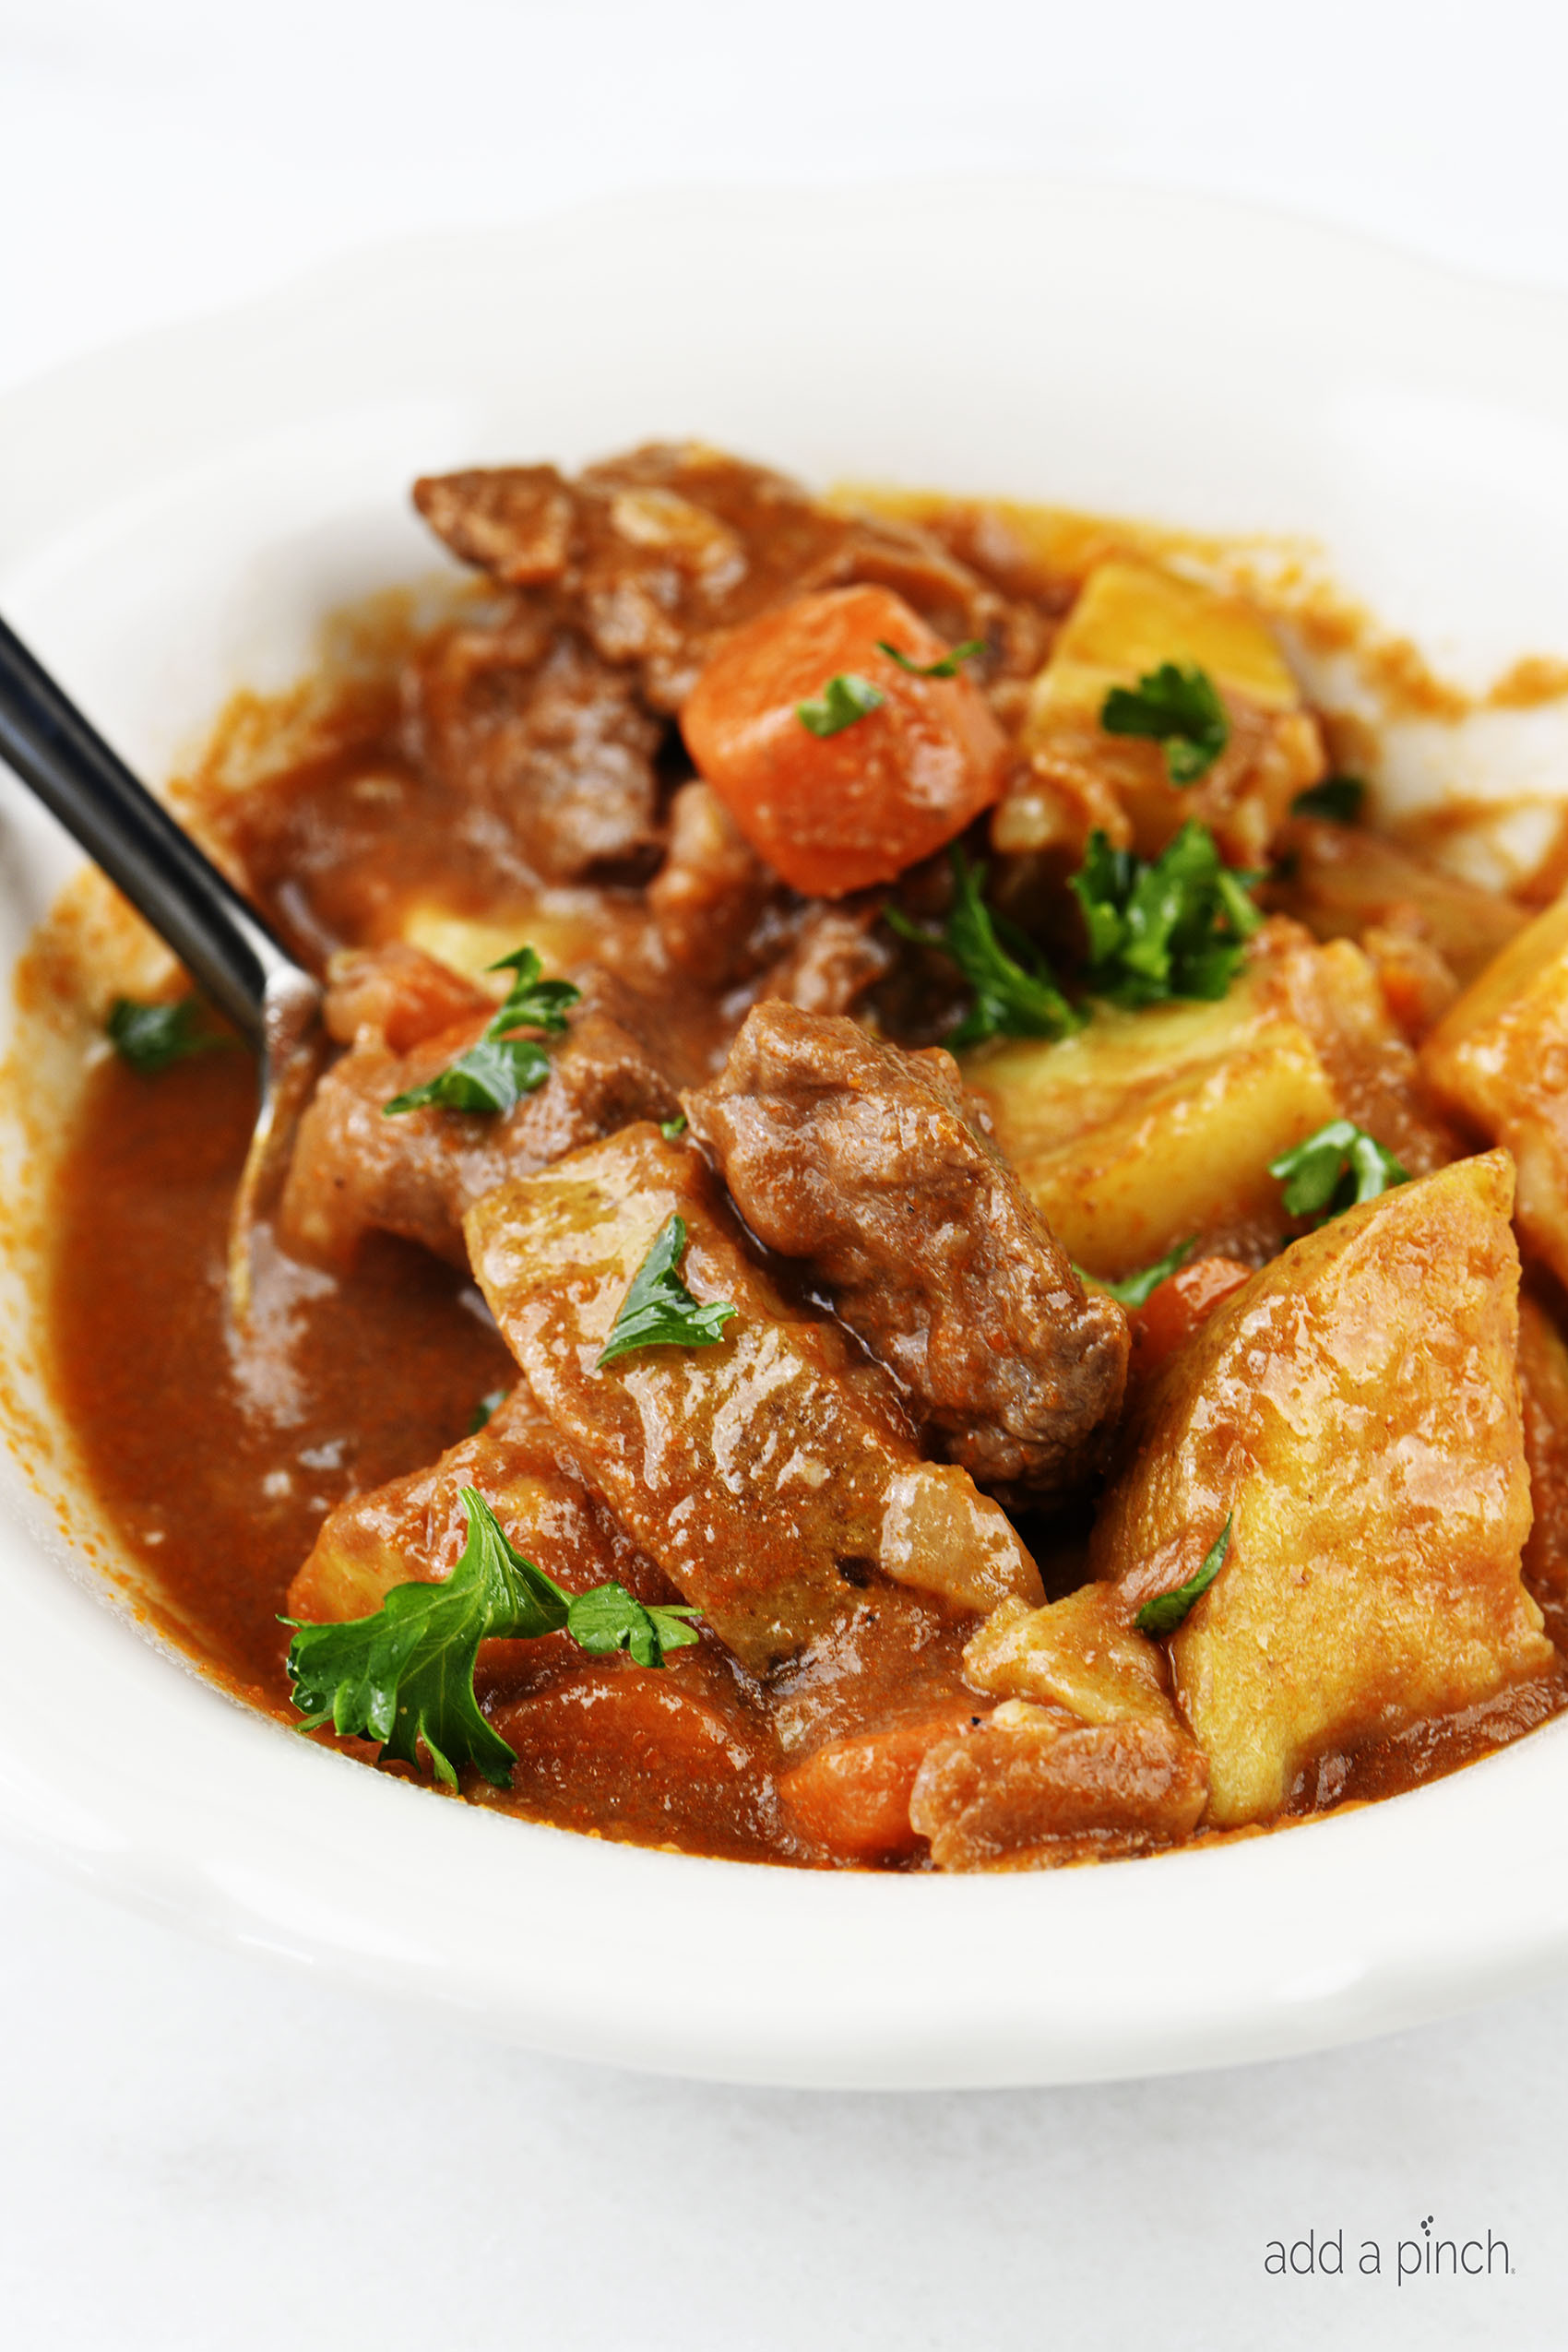 Favorite Instant Pot Recipes
 The Best Instant Pot Beef Stew Recipe Add a Pinch